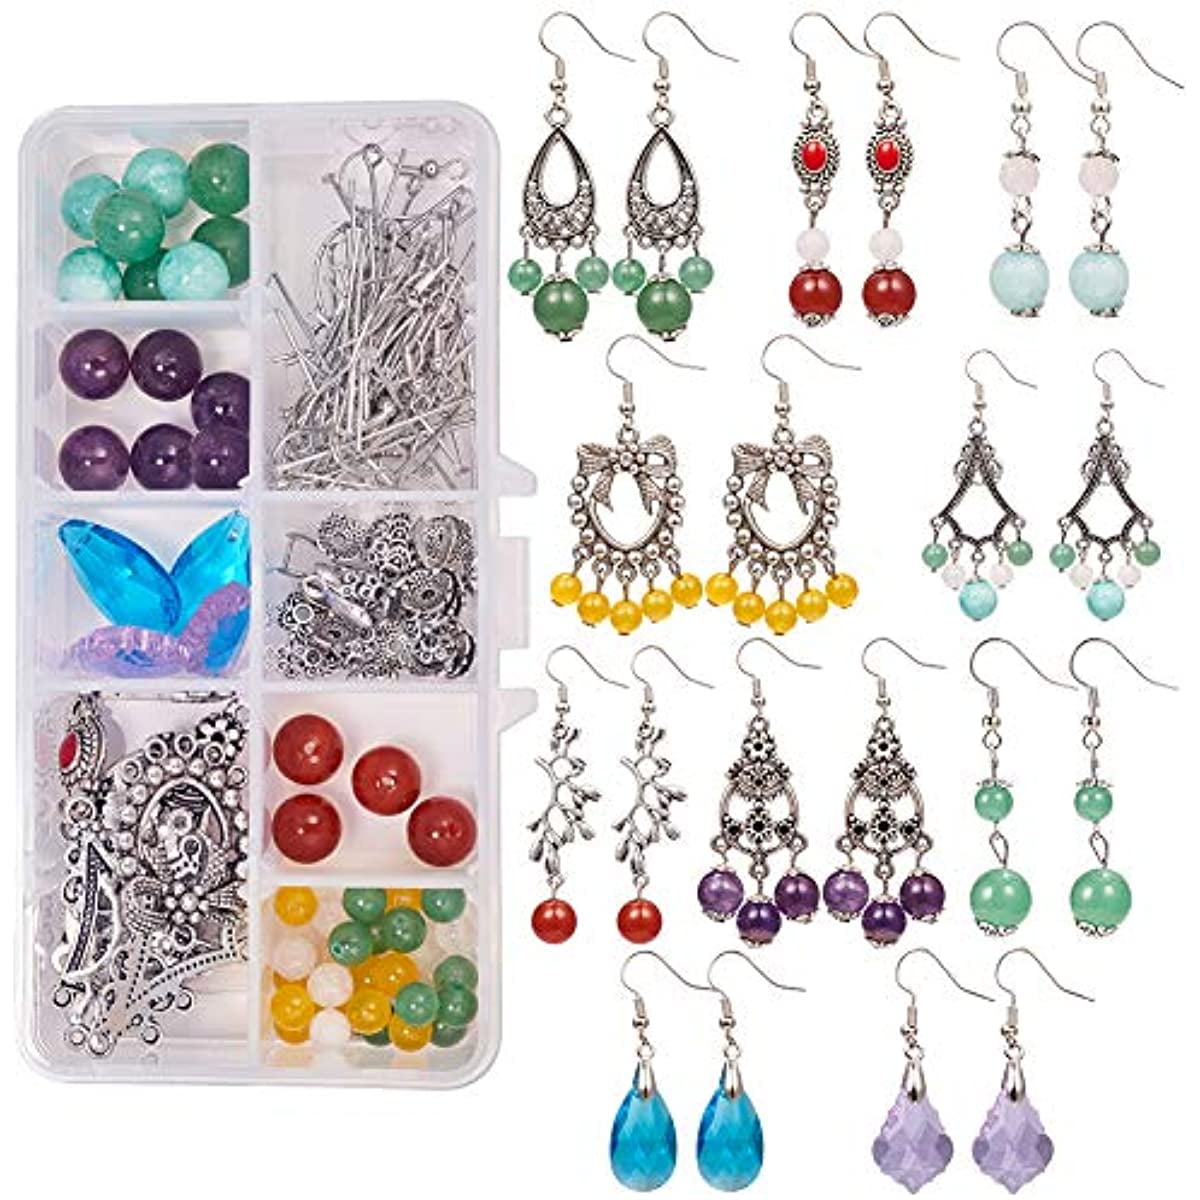 MENKEY Gemstones for Jewelry Making, 1126PCS Rock Beads with Pendants,  Earring Supplies and Making Tools Kit for DIY Bracelet Necklace and  Earrings 